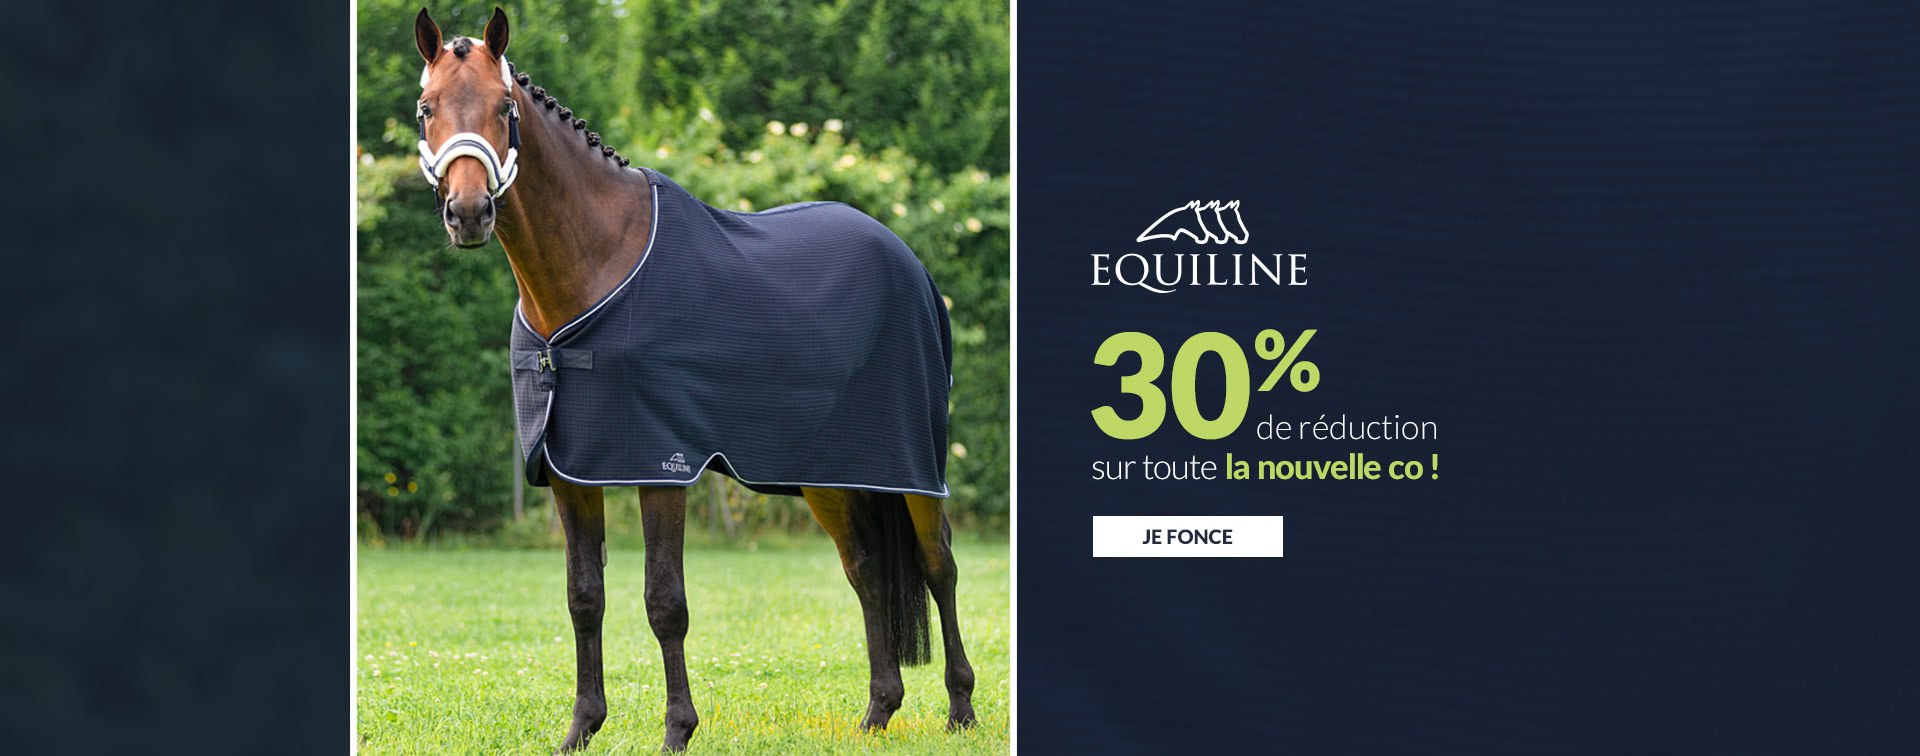 equiline 